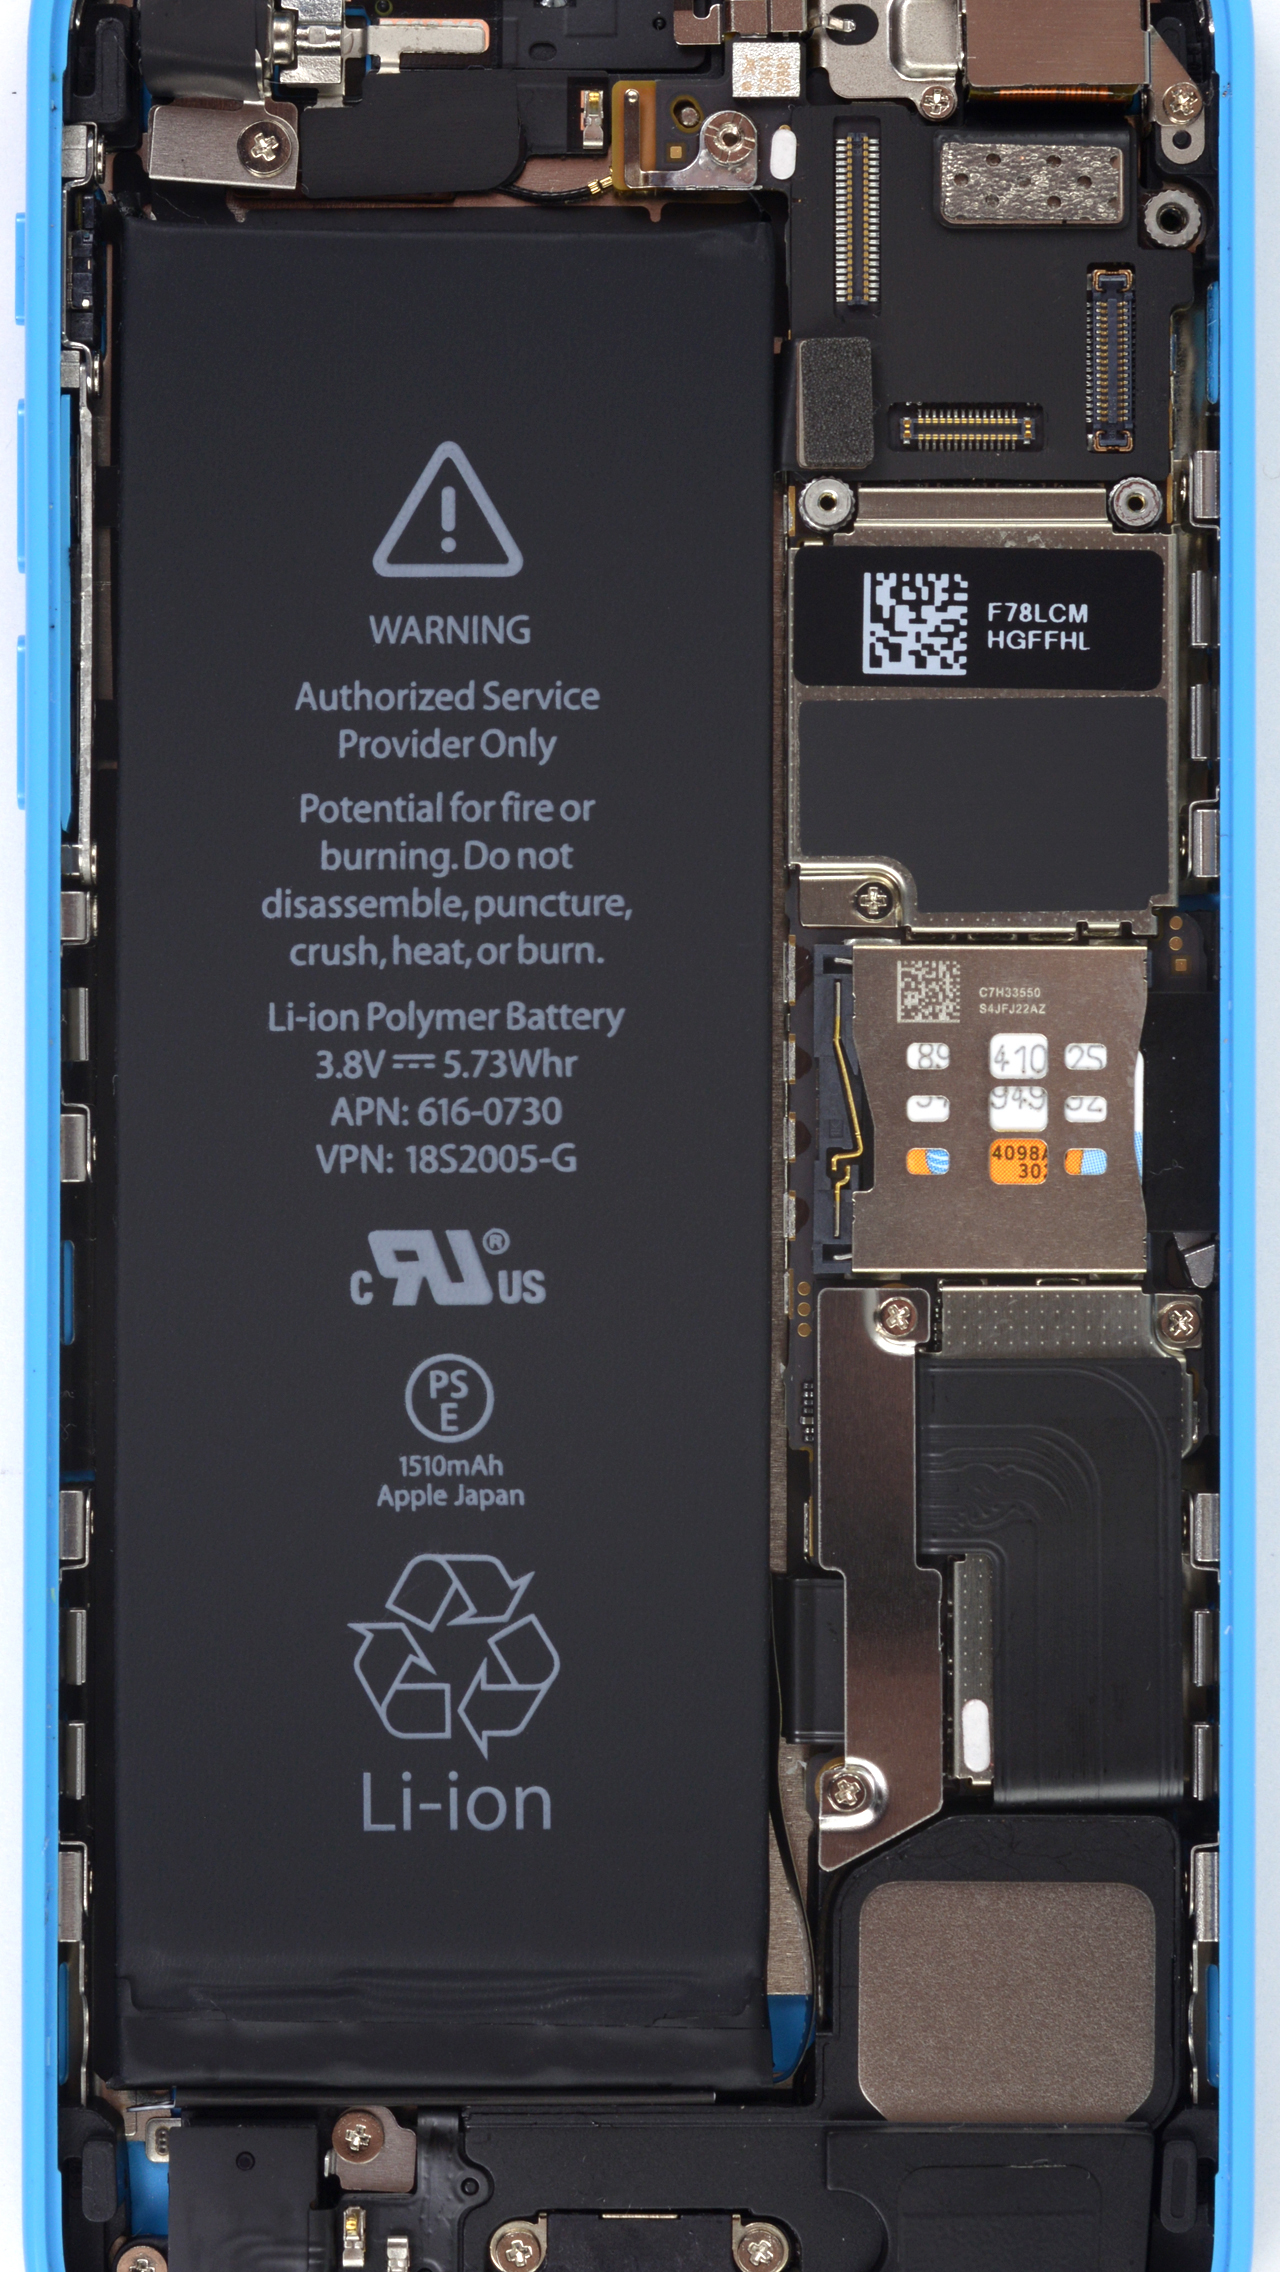 iFixit's internals-exposing wallpapers for the iPhone 5s/5c